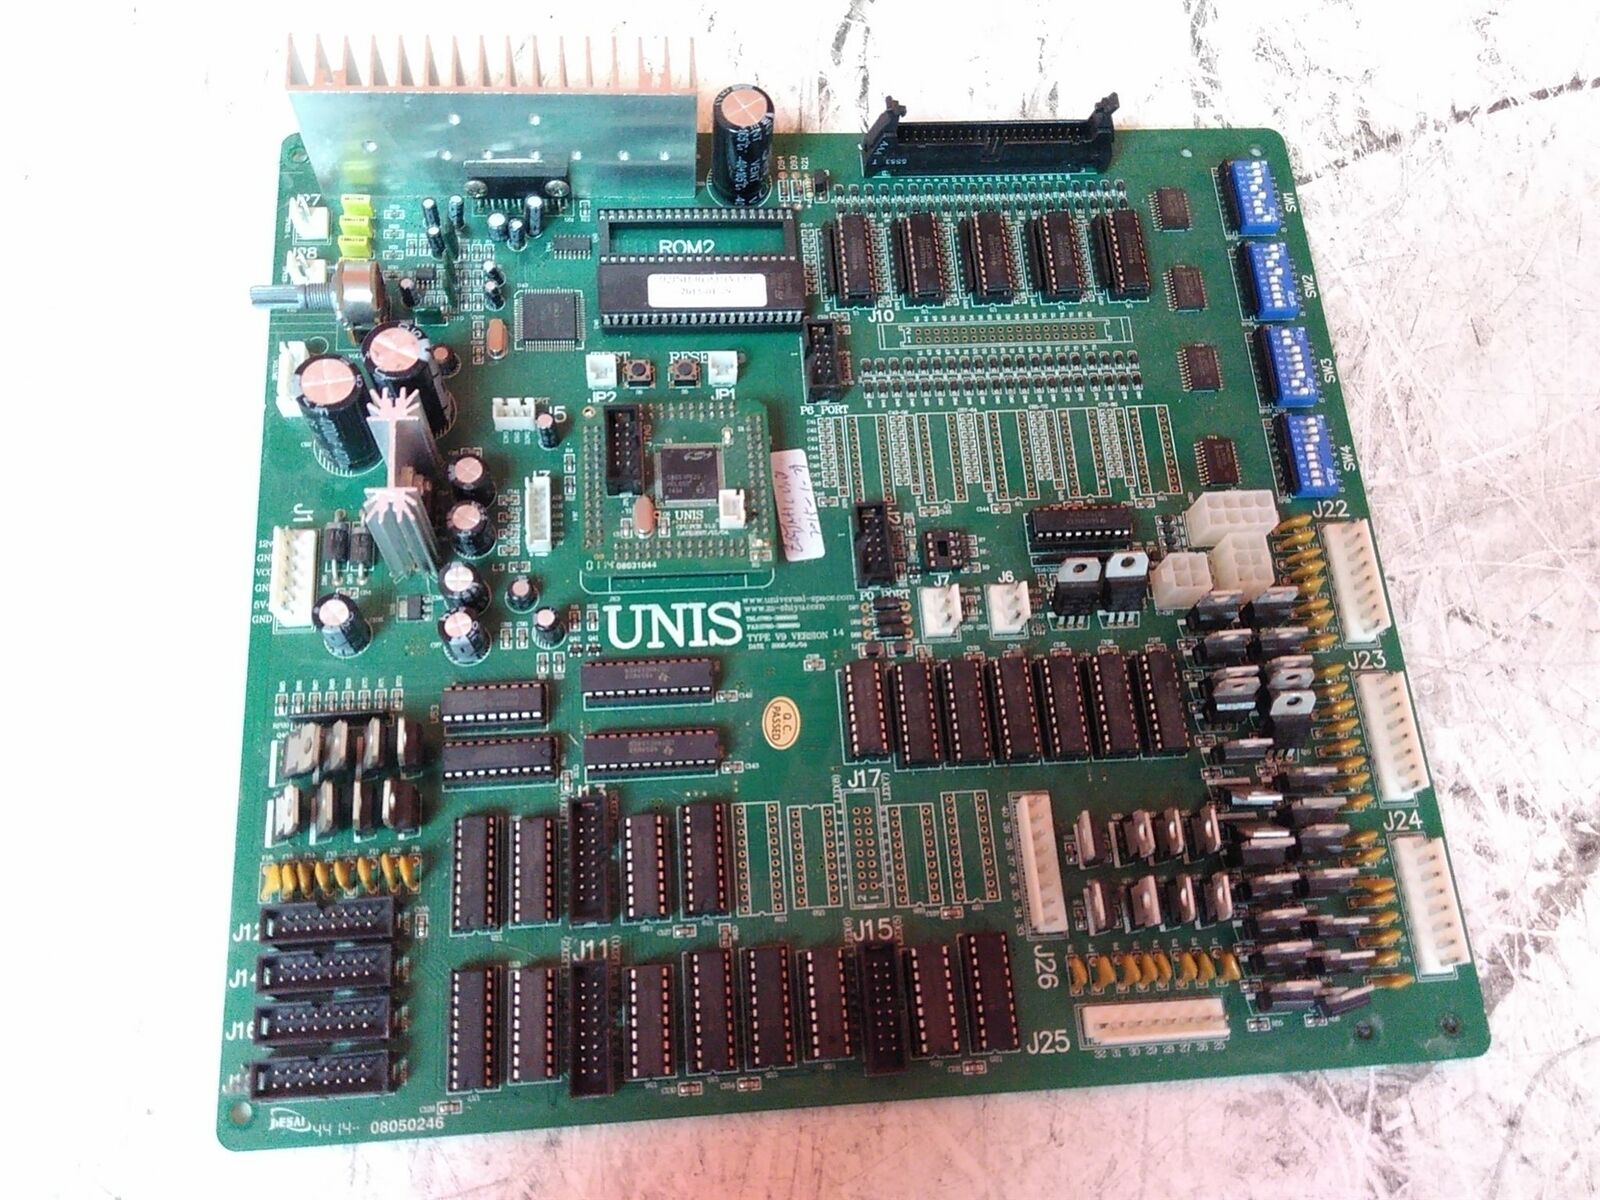 Defective UNIS Type V9 Version 1.4 Controller Board From Beat The Goalie